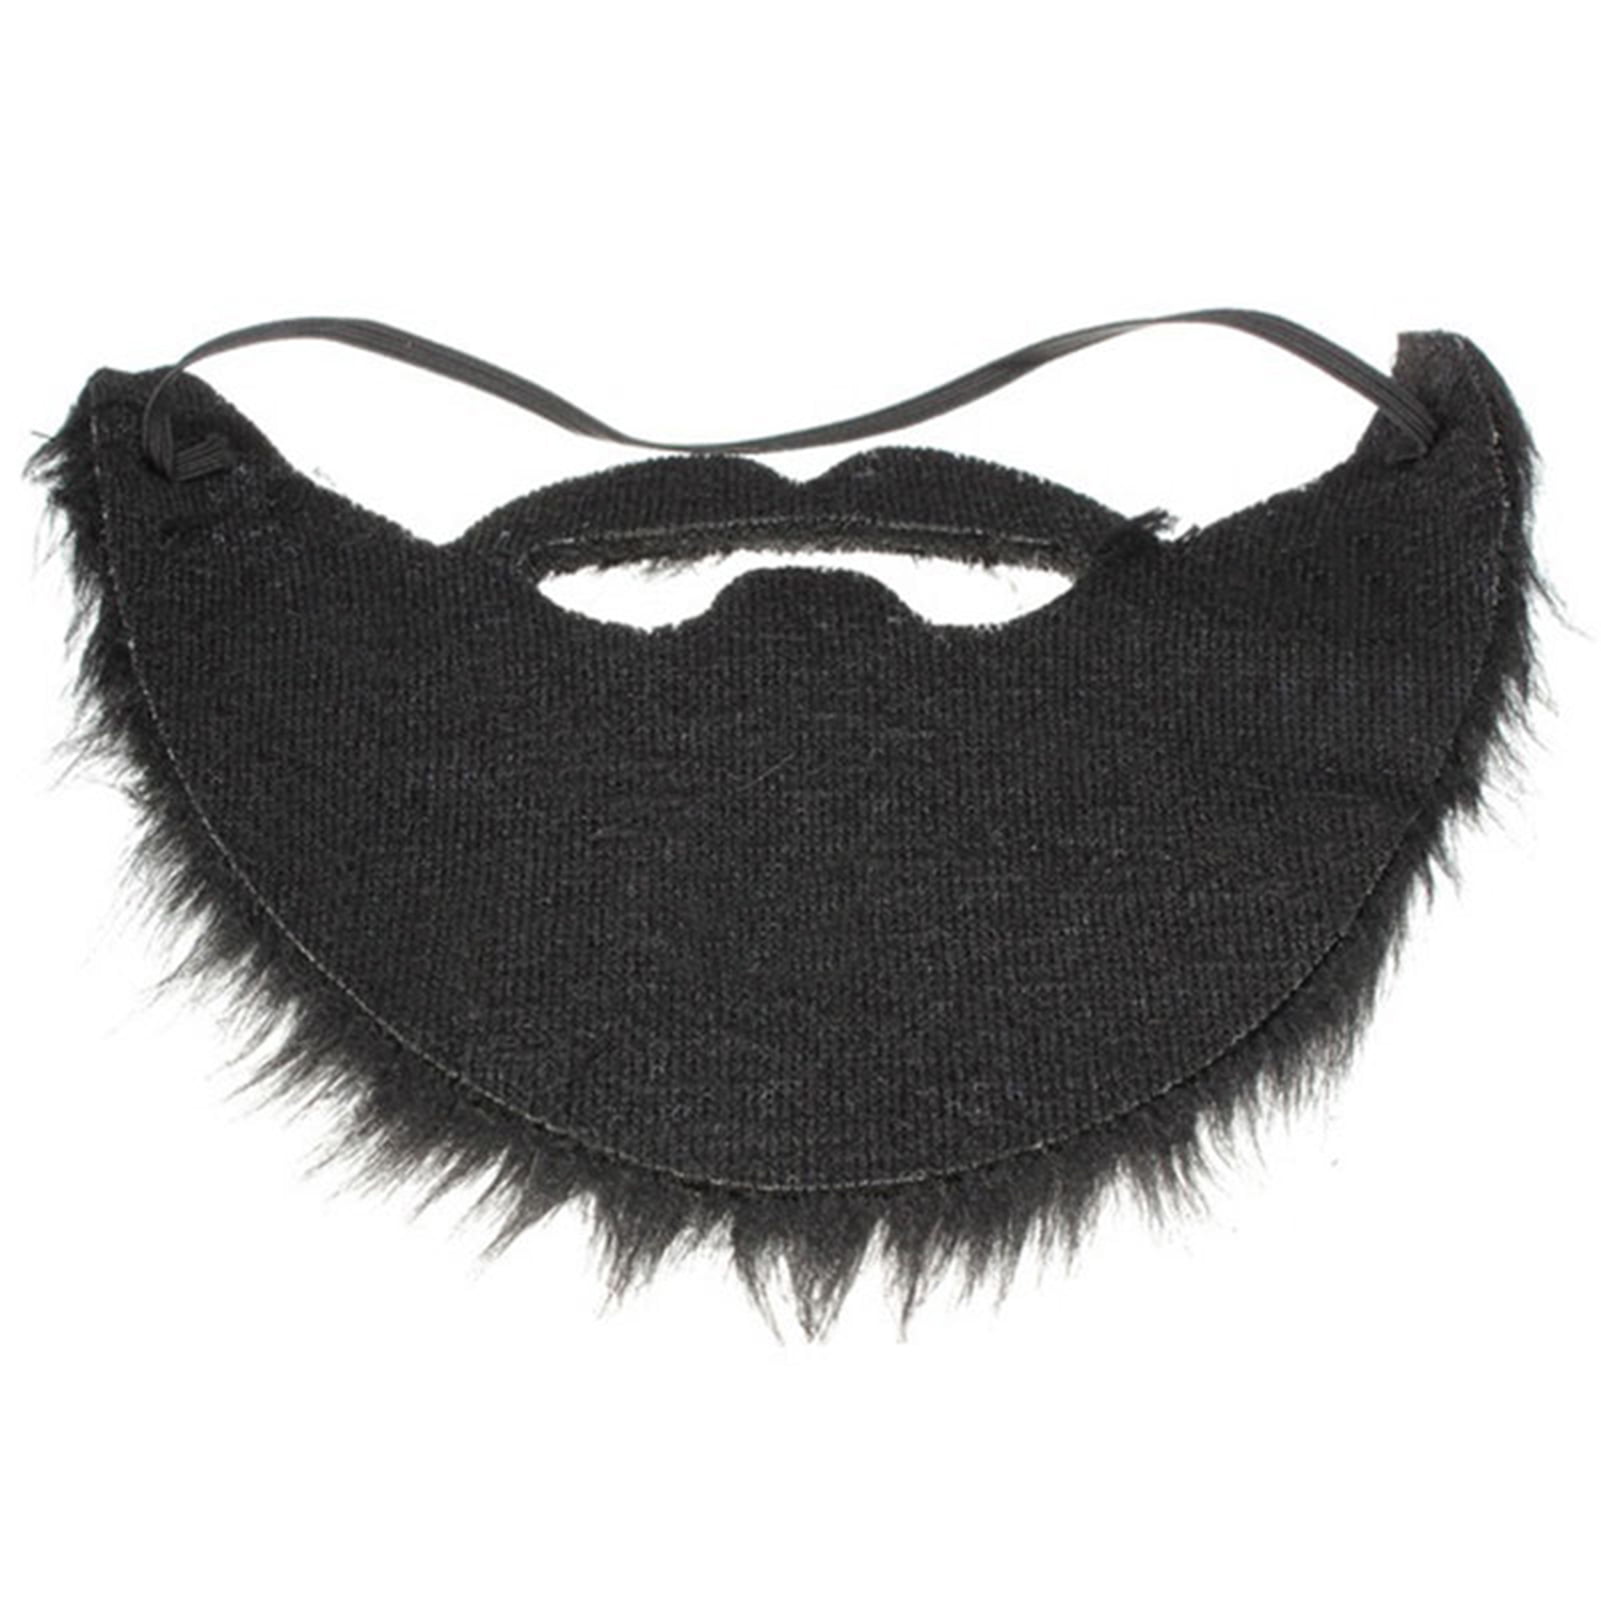 Adult costume beard for stag party fancy dress or when you just need an elastic fake beard and moustache The perfect false beard dress up facial hair black beard gift Black Hipster Beard 